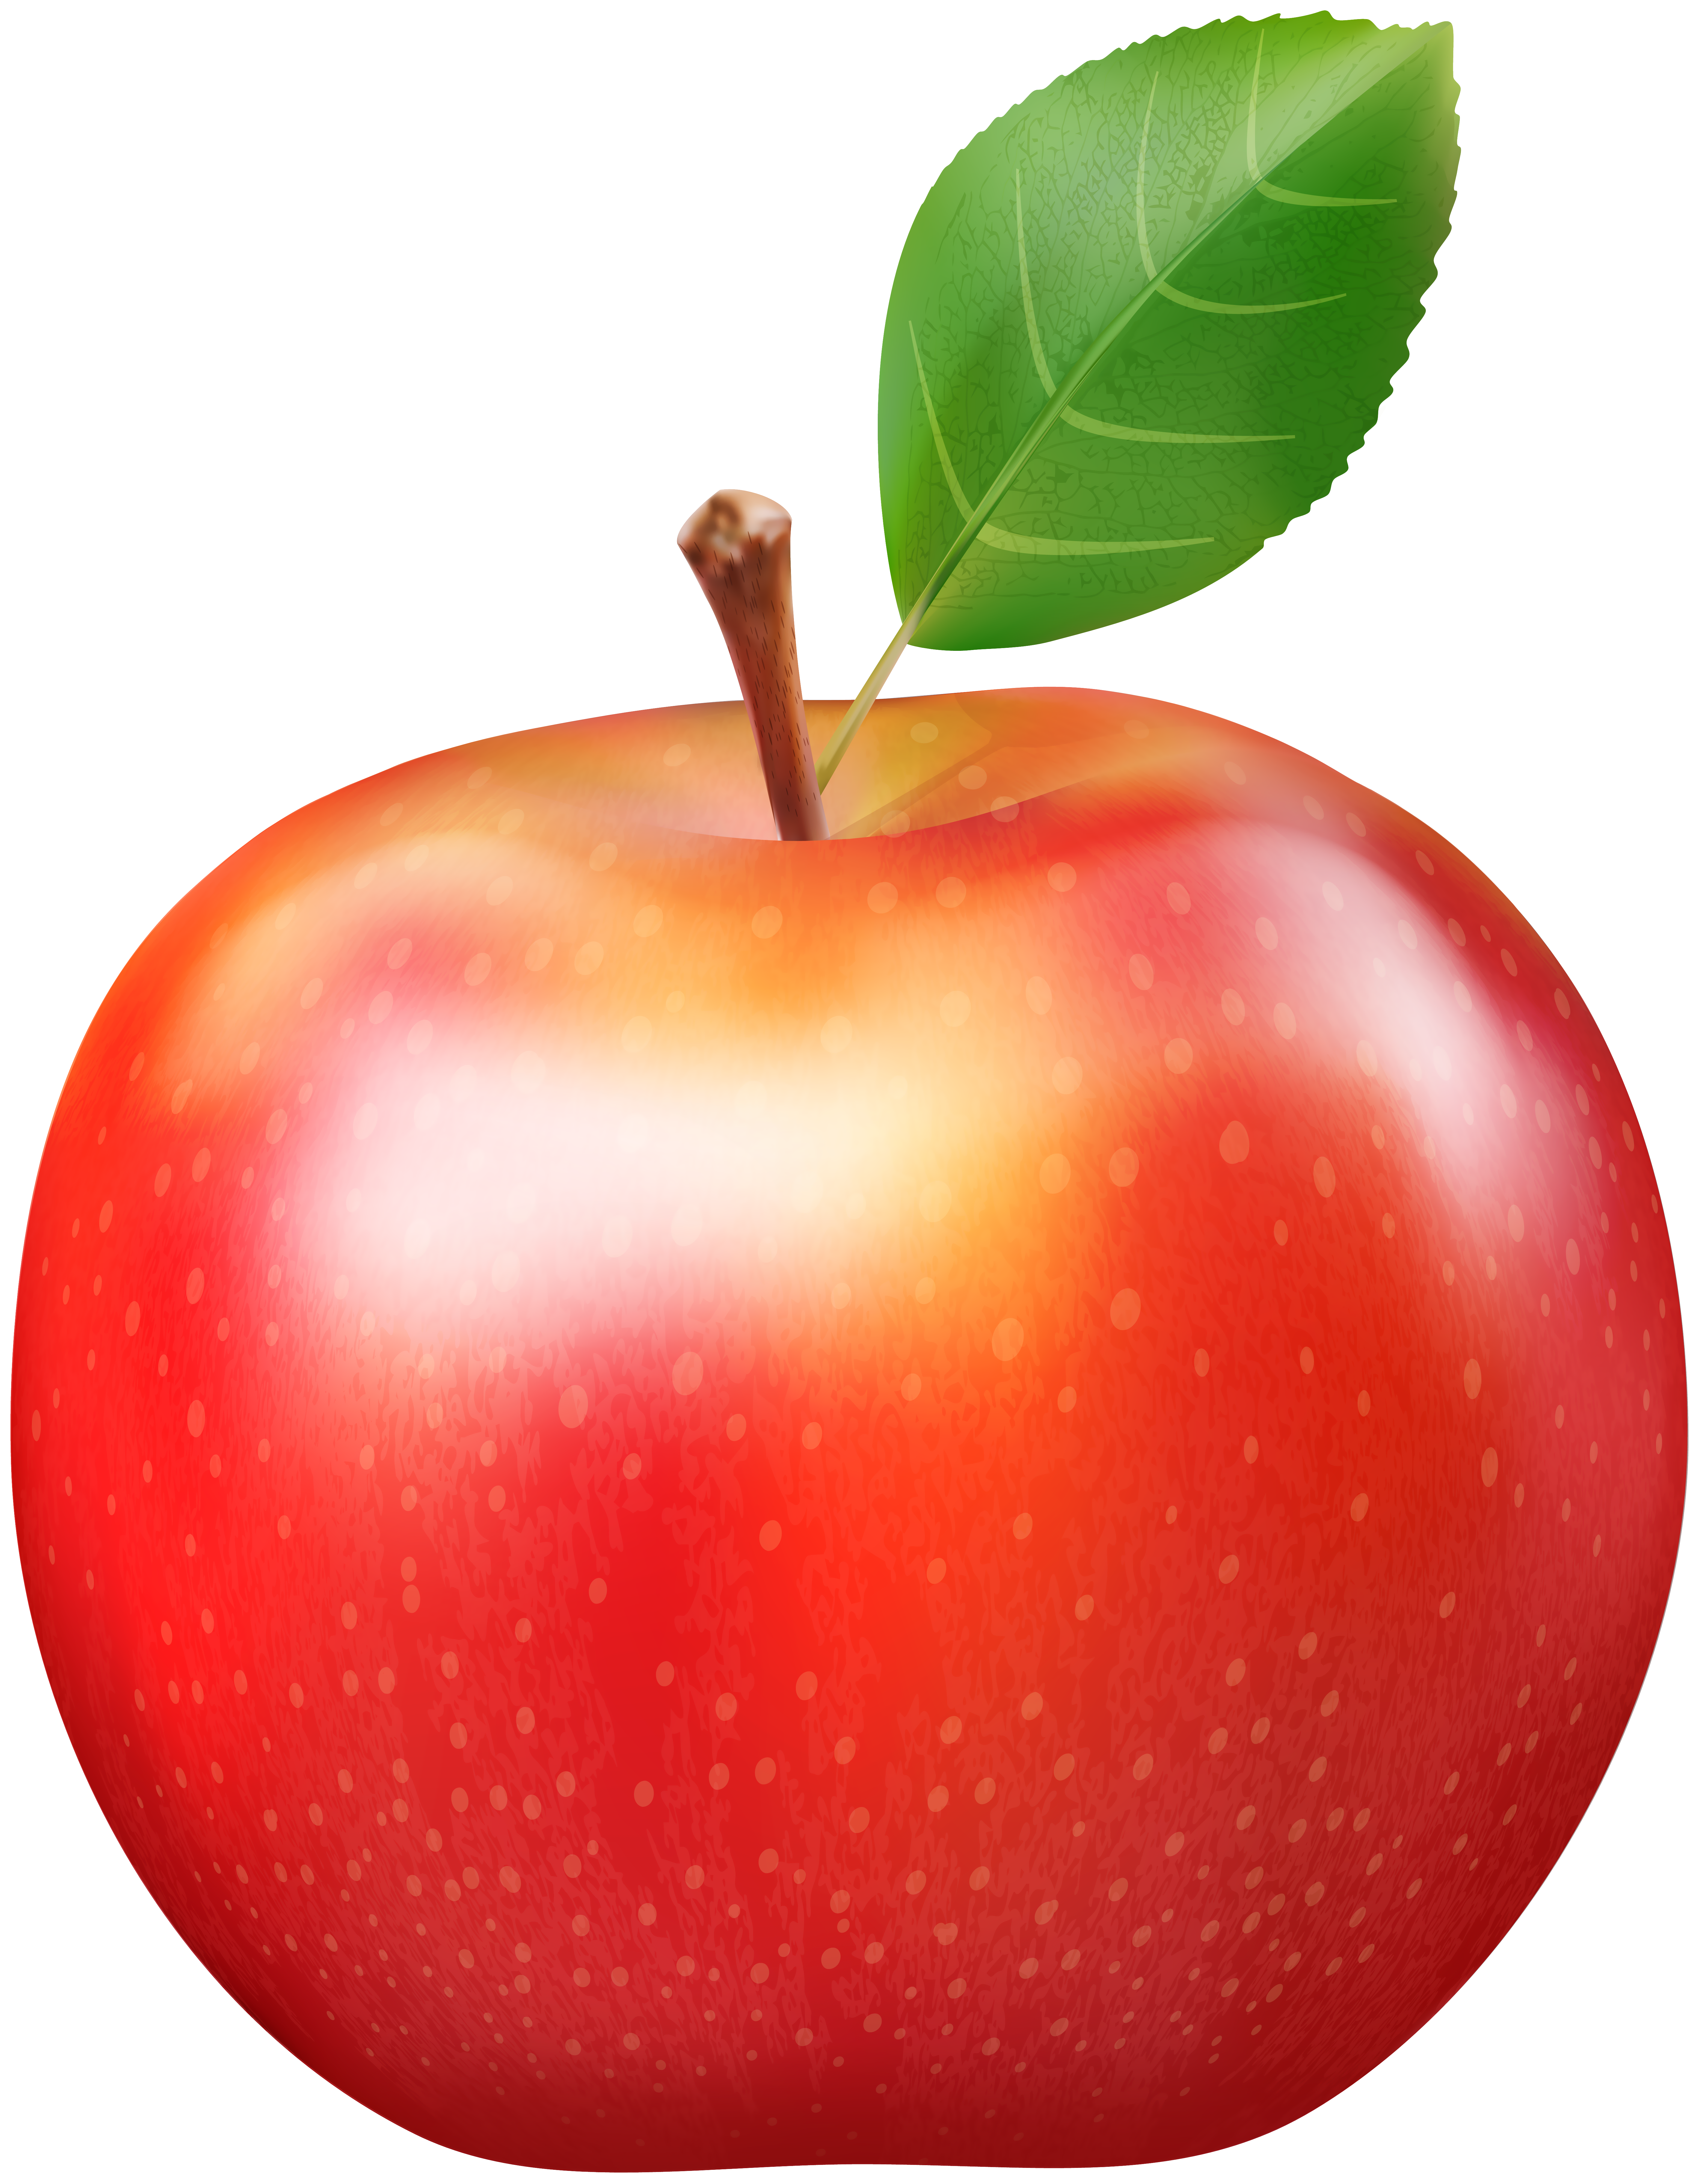 https://gallery.yopriceville.com/var/albums/Free-Clipart-Pictures/Fruit-PNG/Fresh_Red_Apple_PNG_Clip_Art_Image.png?m=1538699376